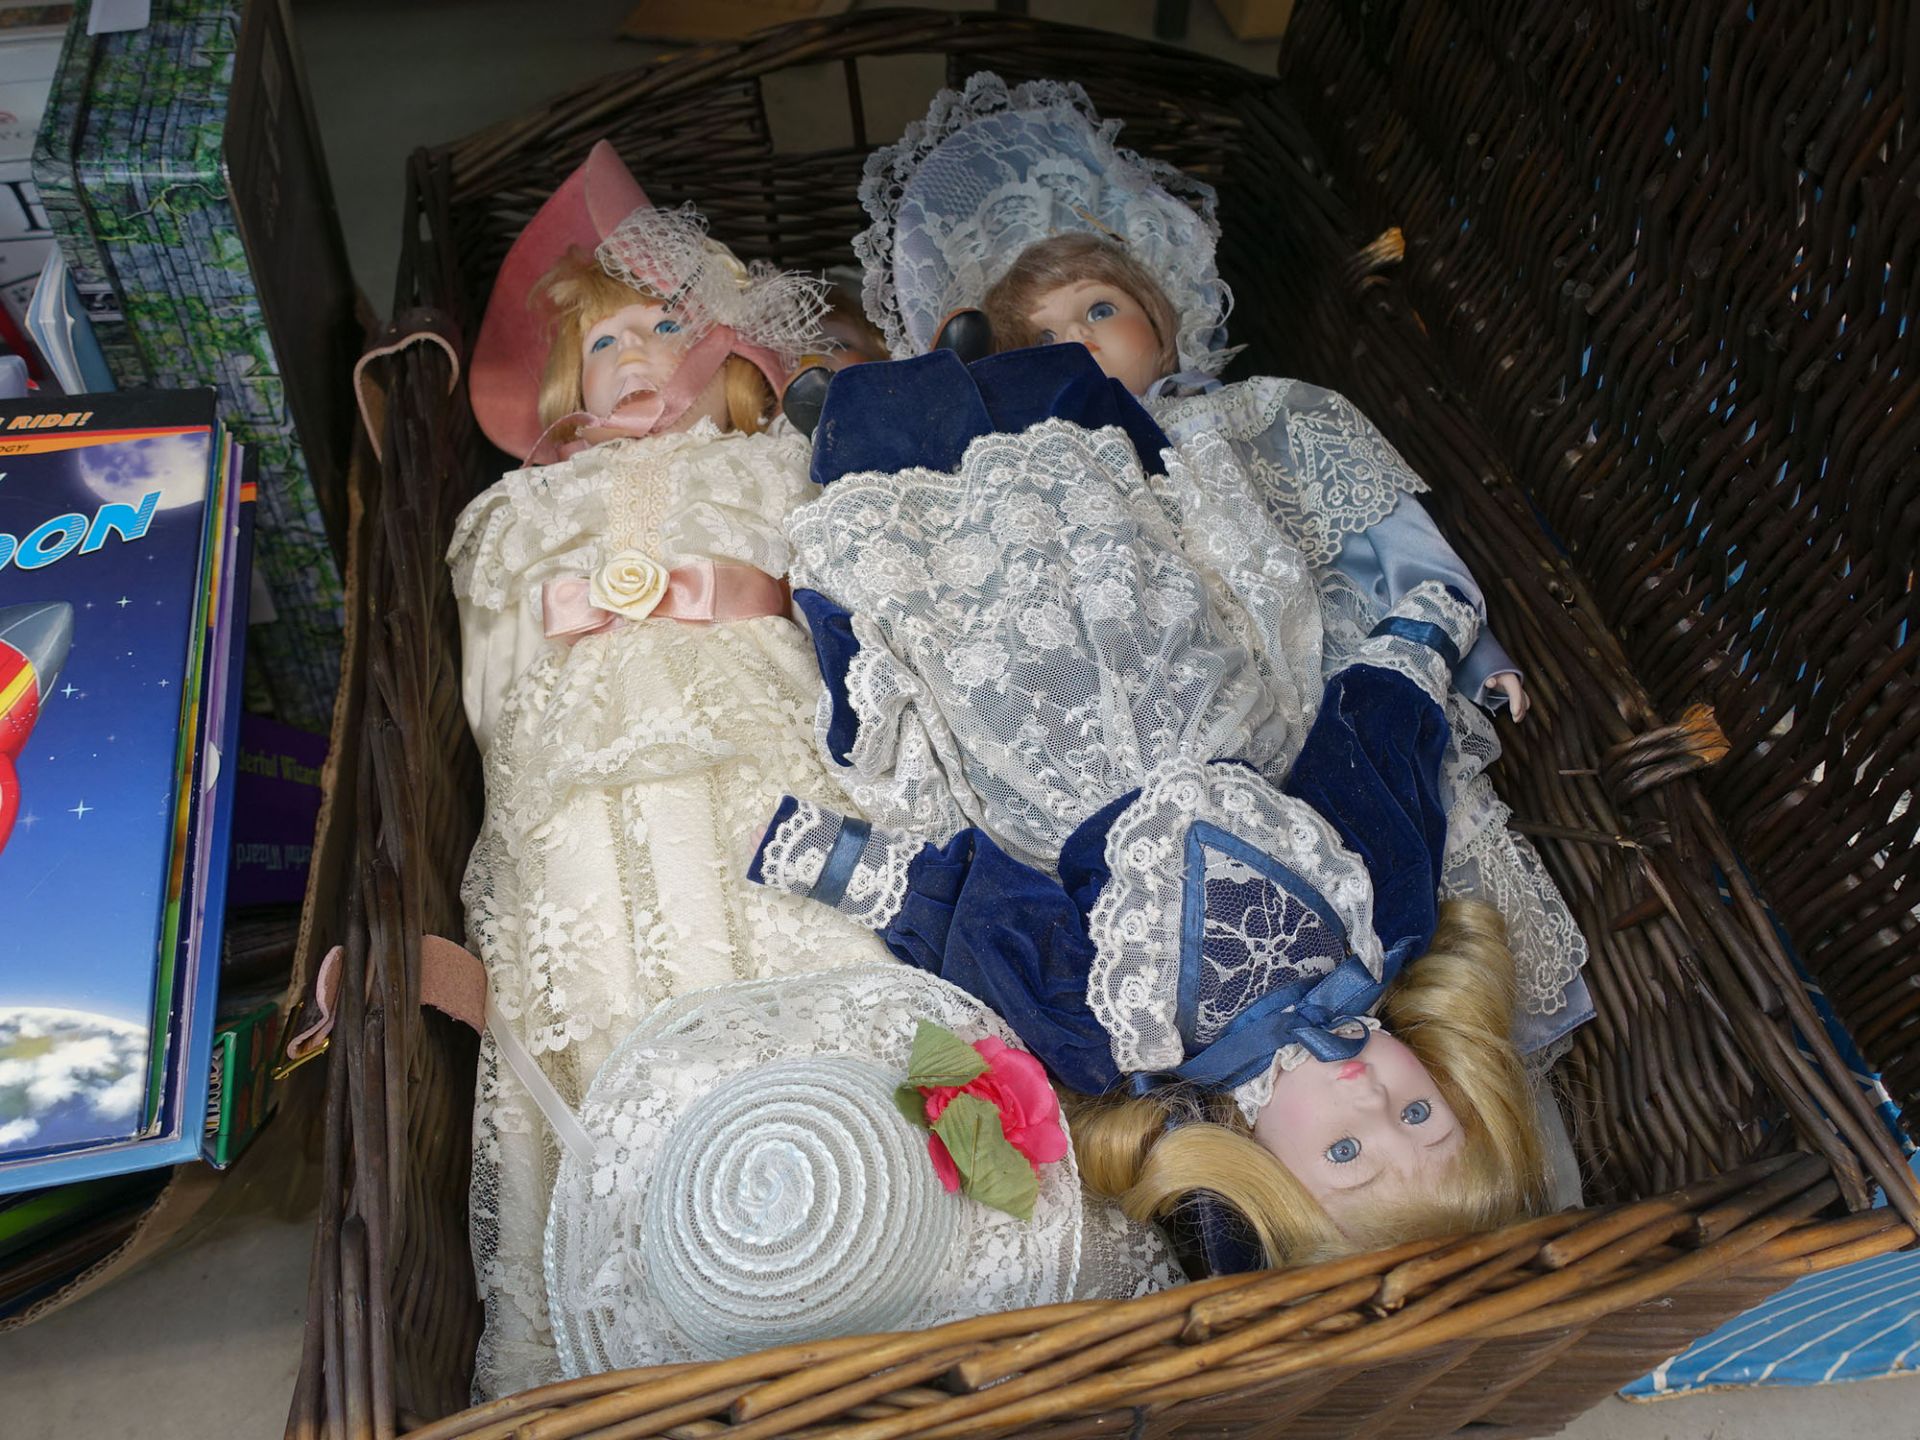 Wicker basket with quantity of porcelain dolls